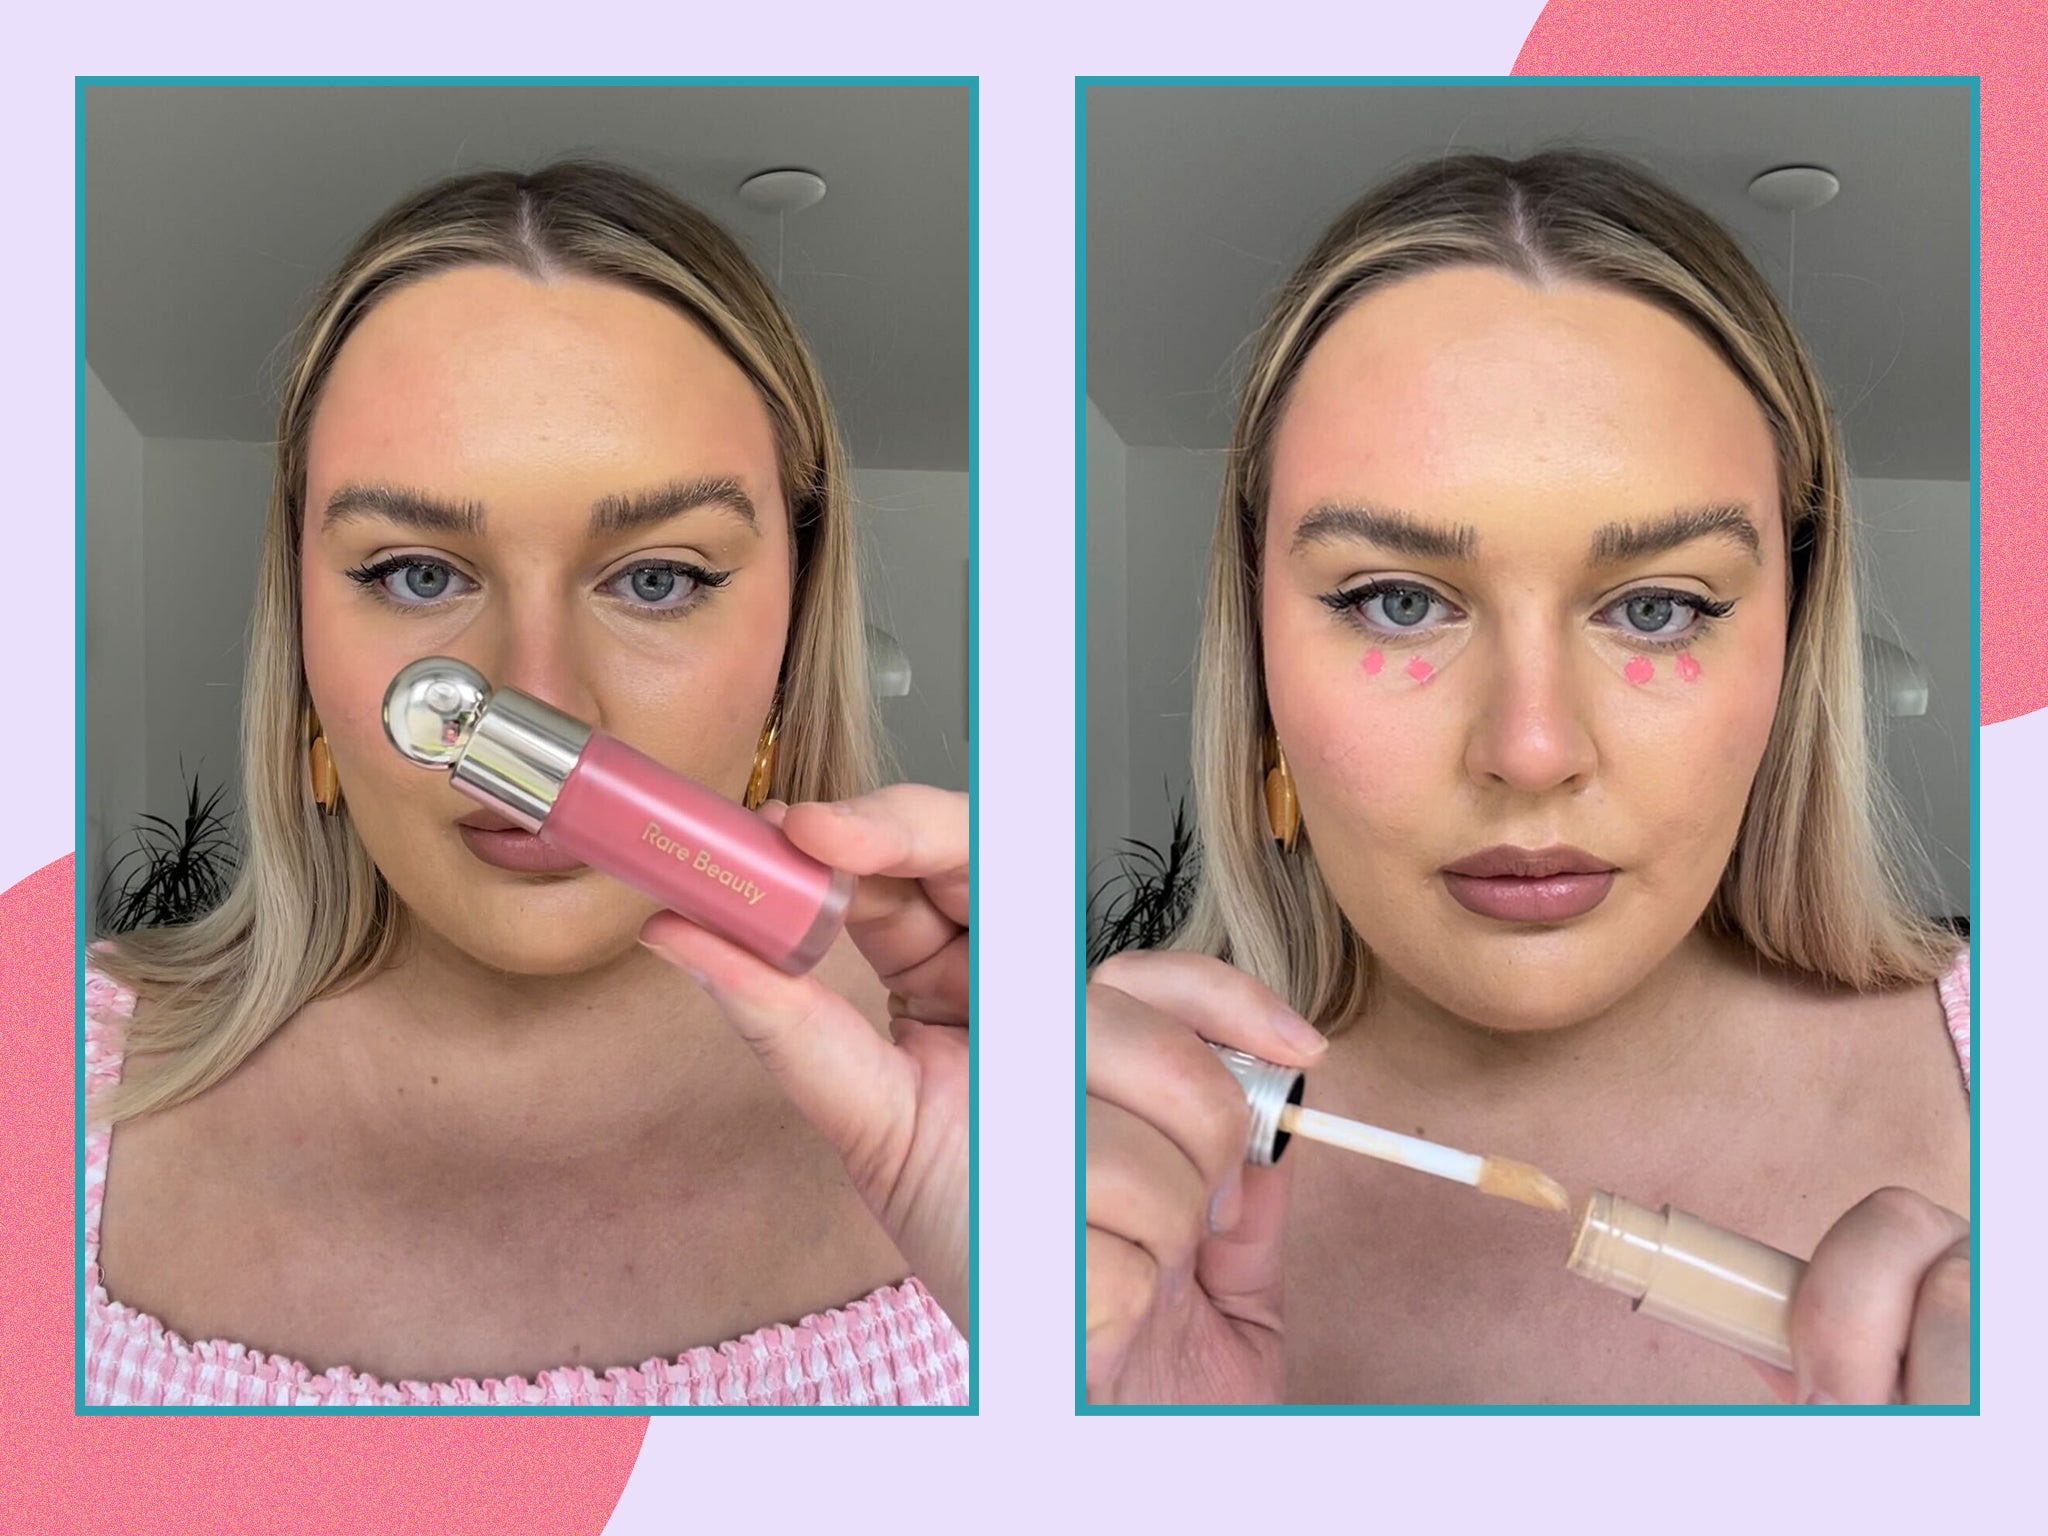 We applied Rare Beauty’s liquid blush before putting concealer on top